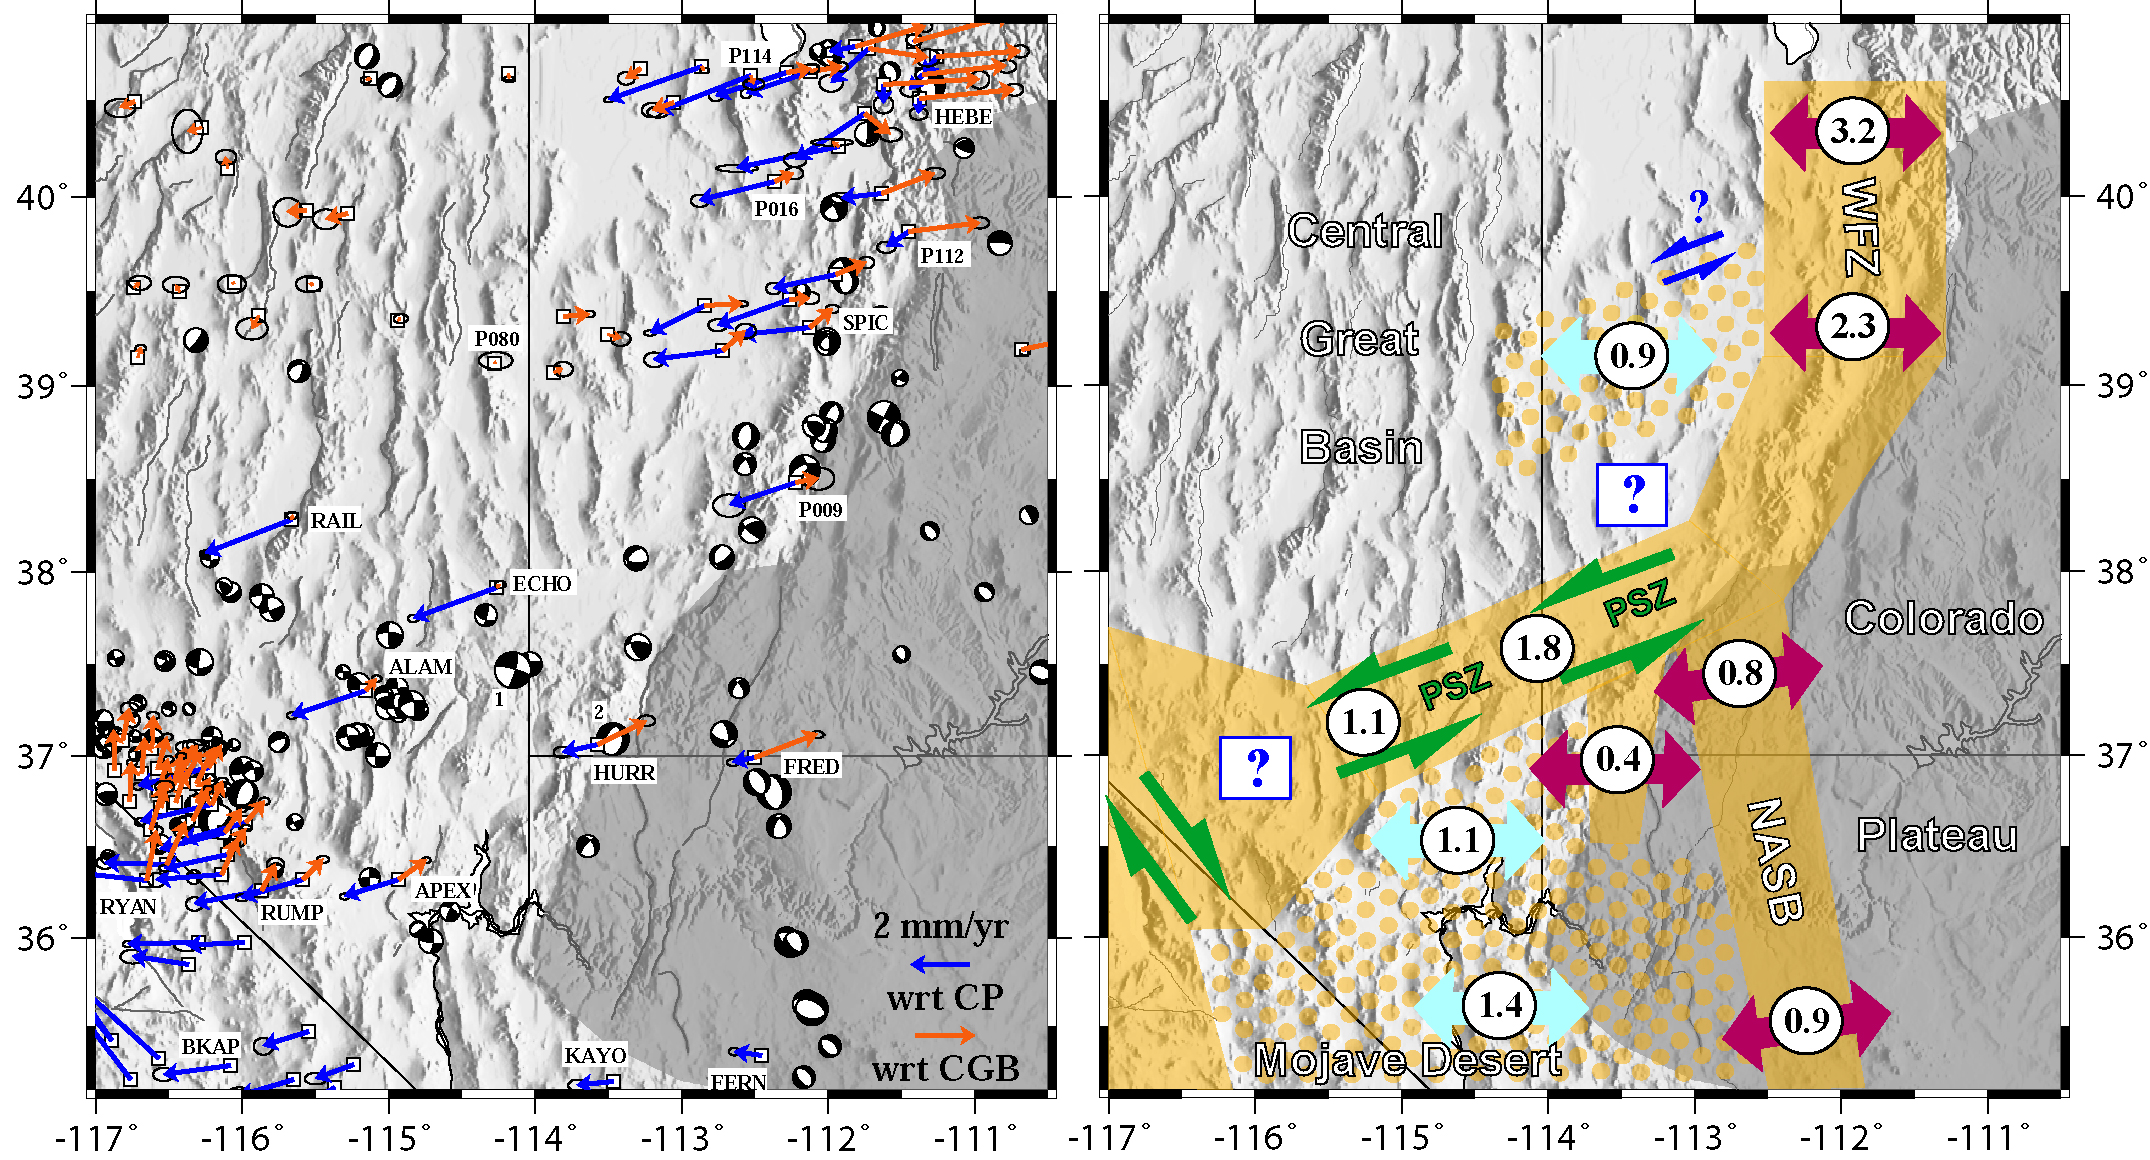 map of GPS velocities and earthquake moment tensors